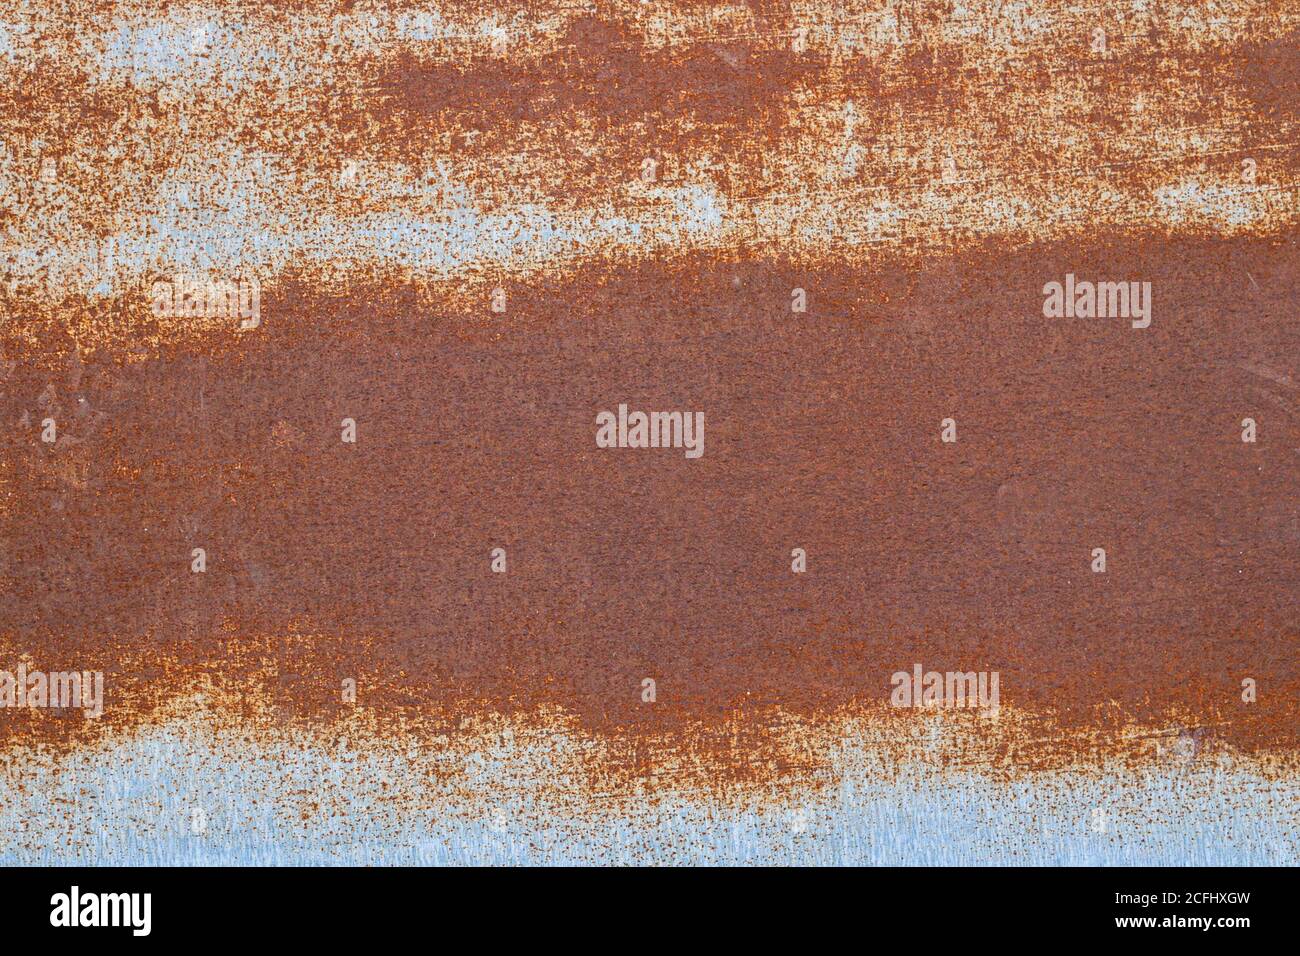 rusty surface of old roof metal sheet, architectural texture for your design Stock Photo